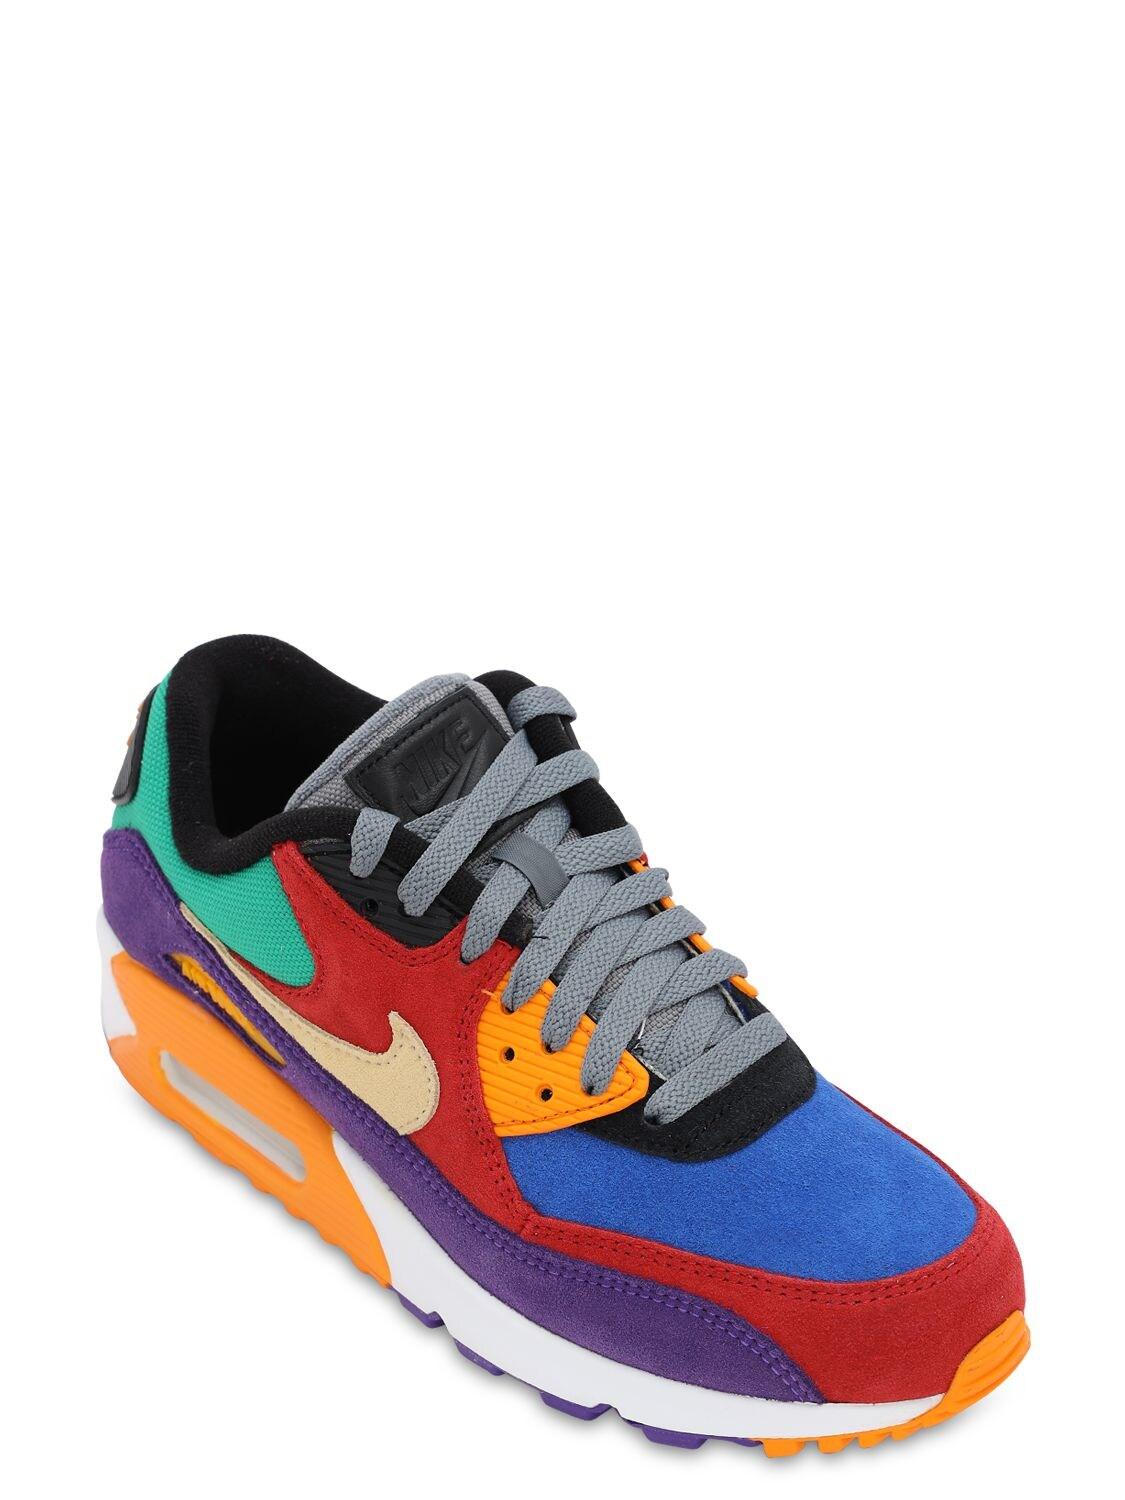 Nike Synthetic Air Max 90 Qs Viotech Sneakers in Blue - Lyst